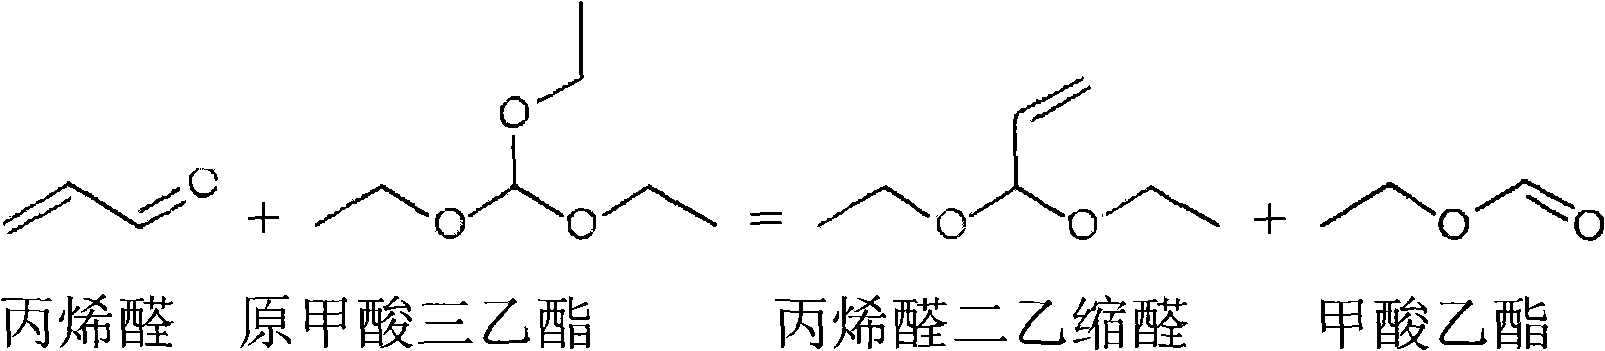 A method for preparing acetal with acrolein